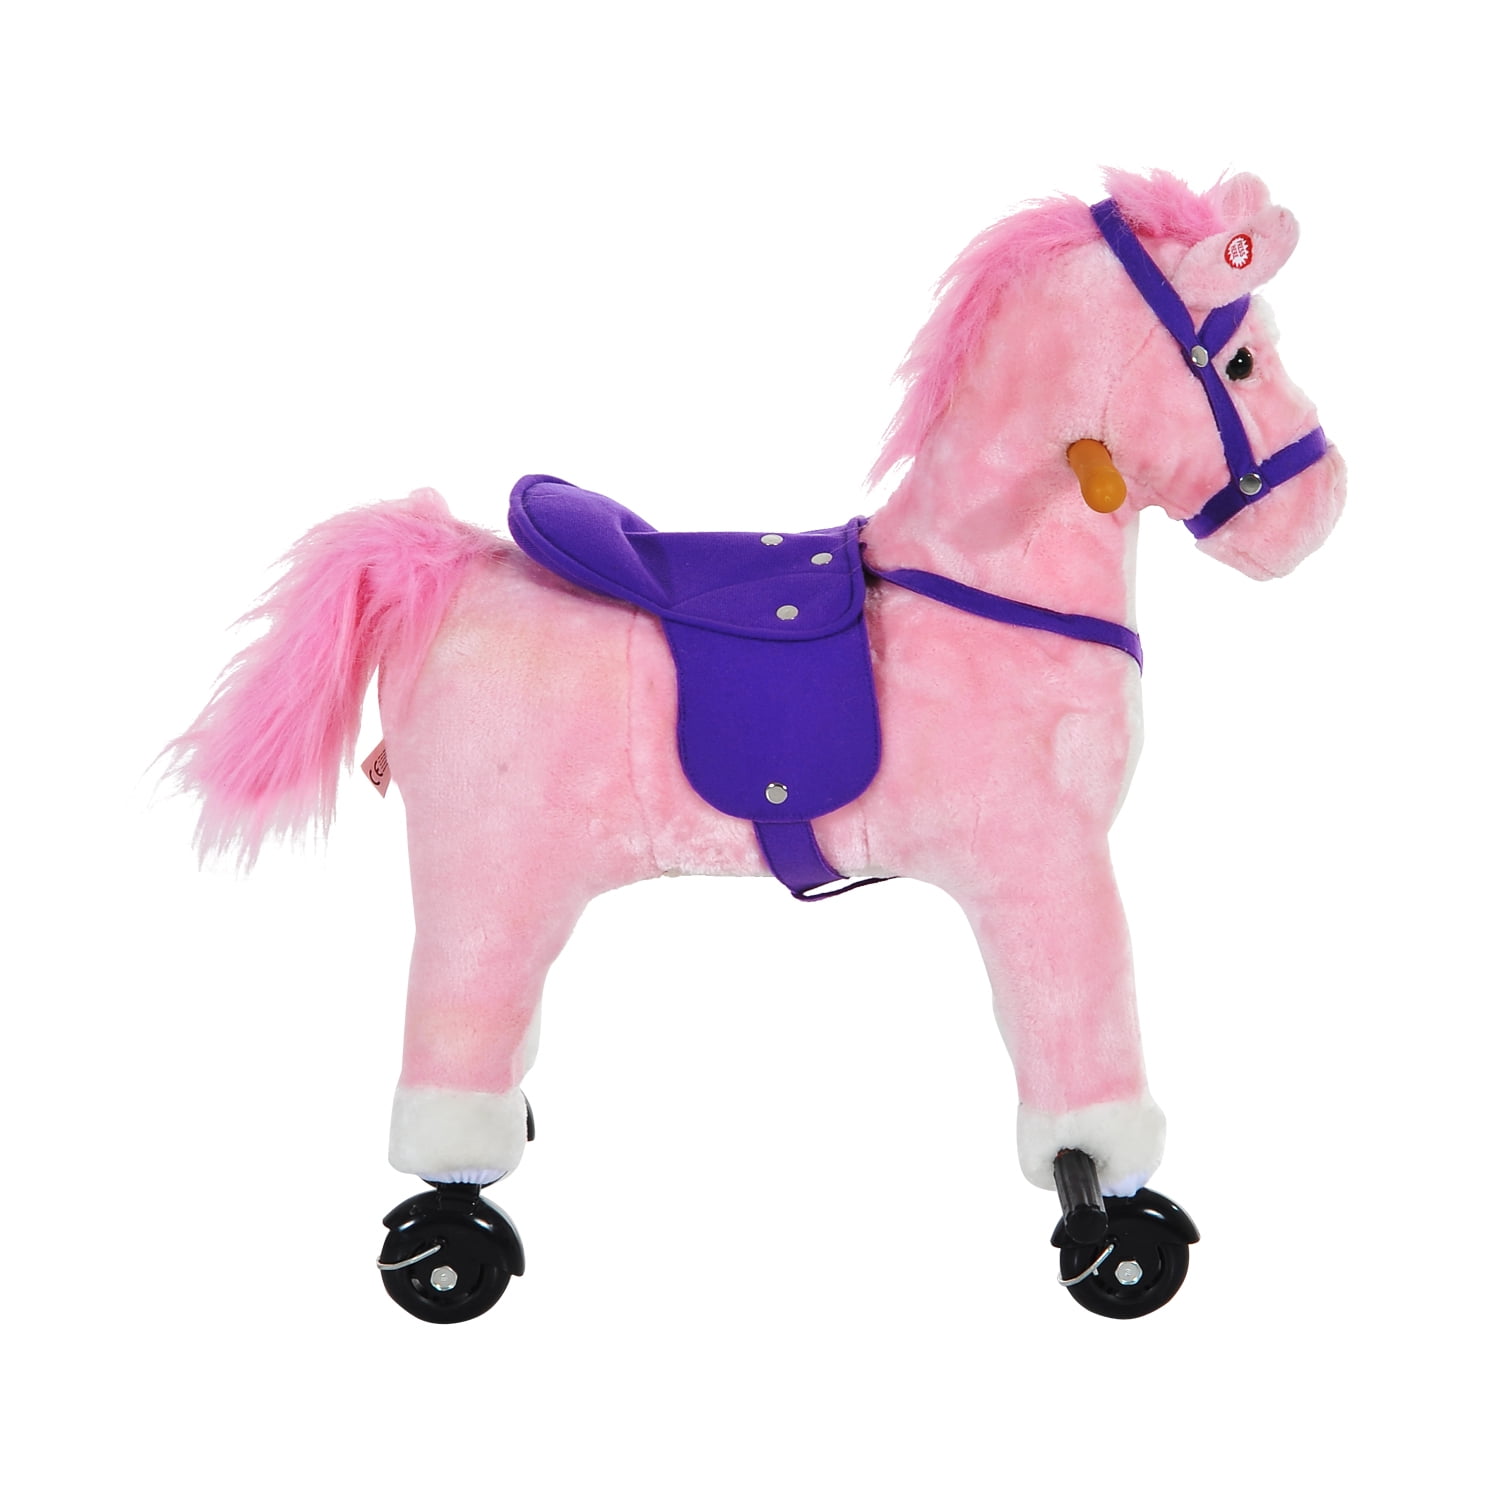 Kids Walking Pony Ride on Horse Rocking Toy Wheels & Footrest Neigh Sound Pink 